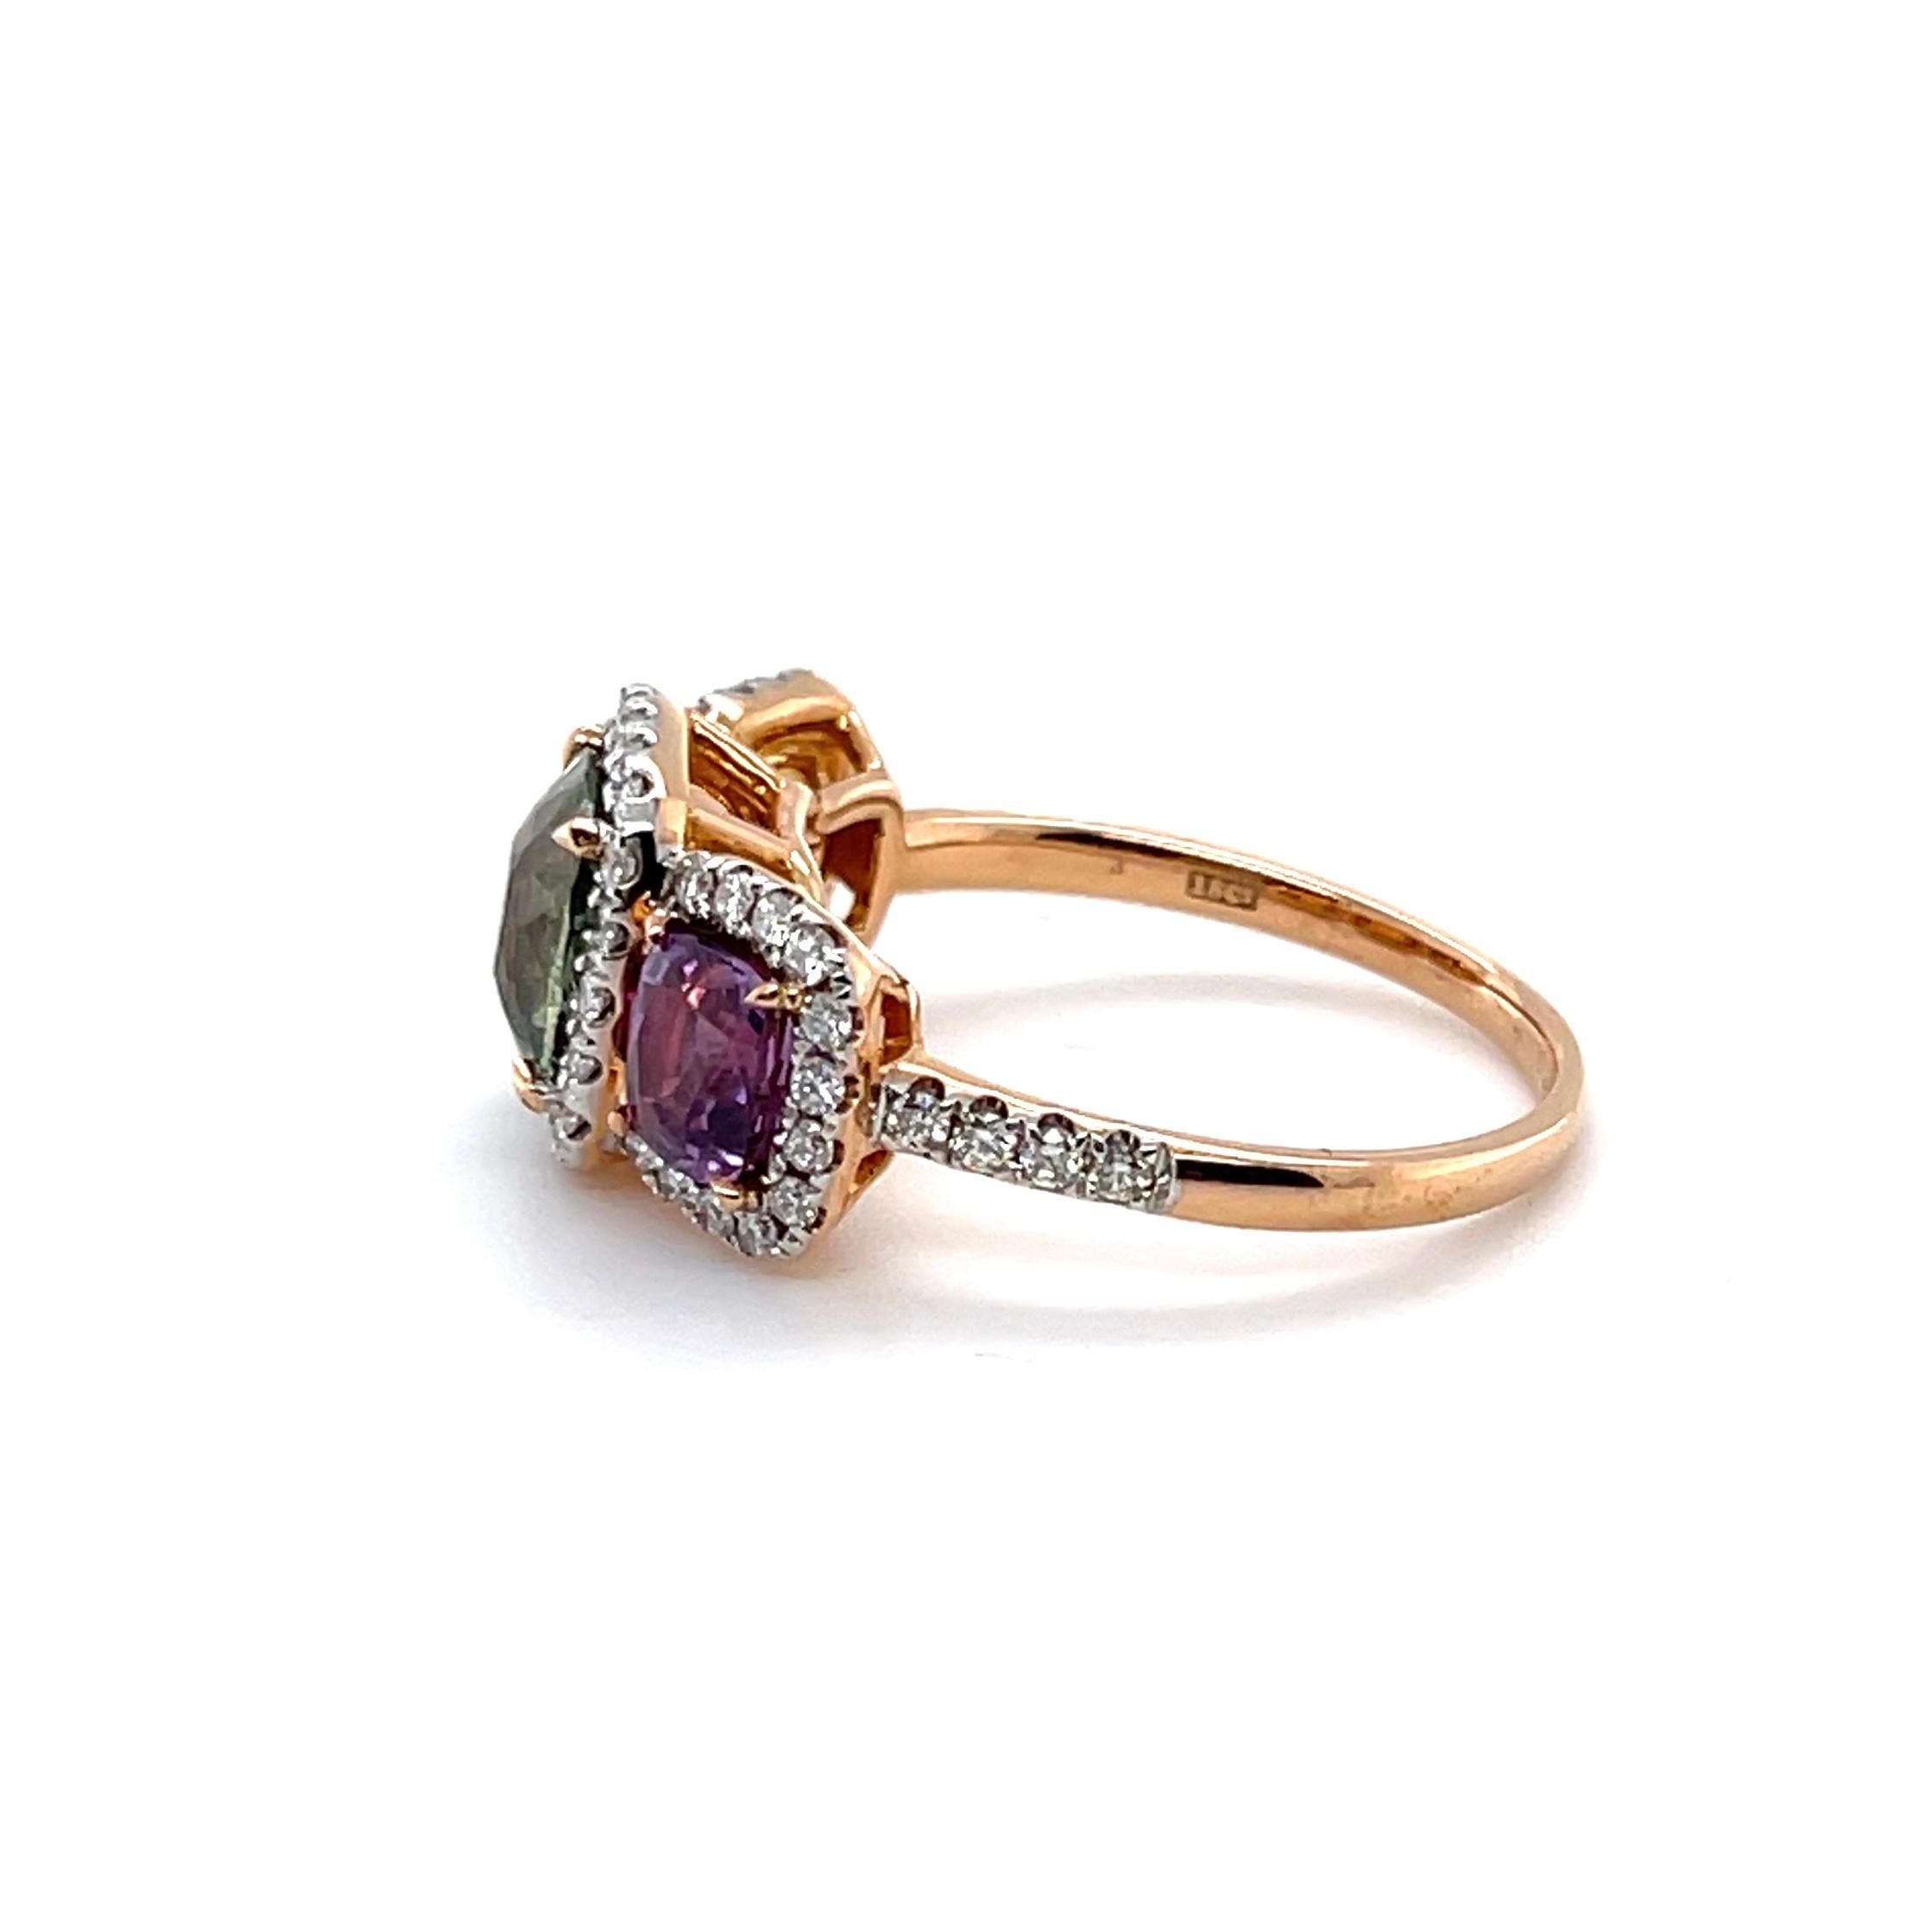 For Sale:  18ct Rose Gold 'No Heat' Trilogy Coloured Sapphire Ring 3